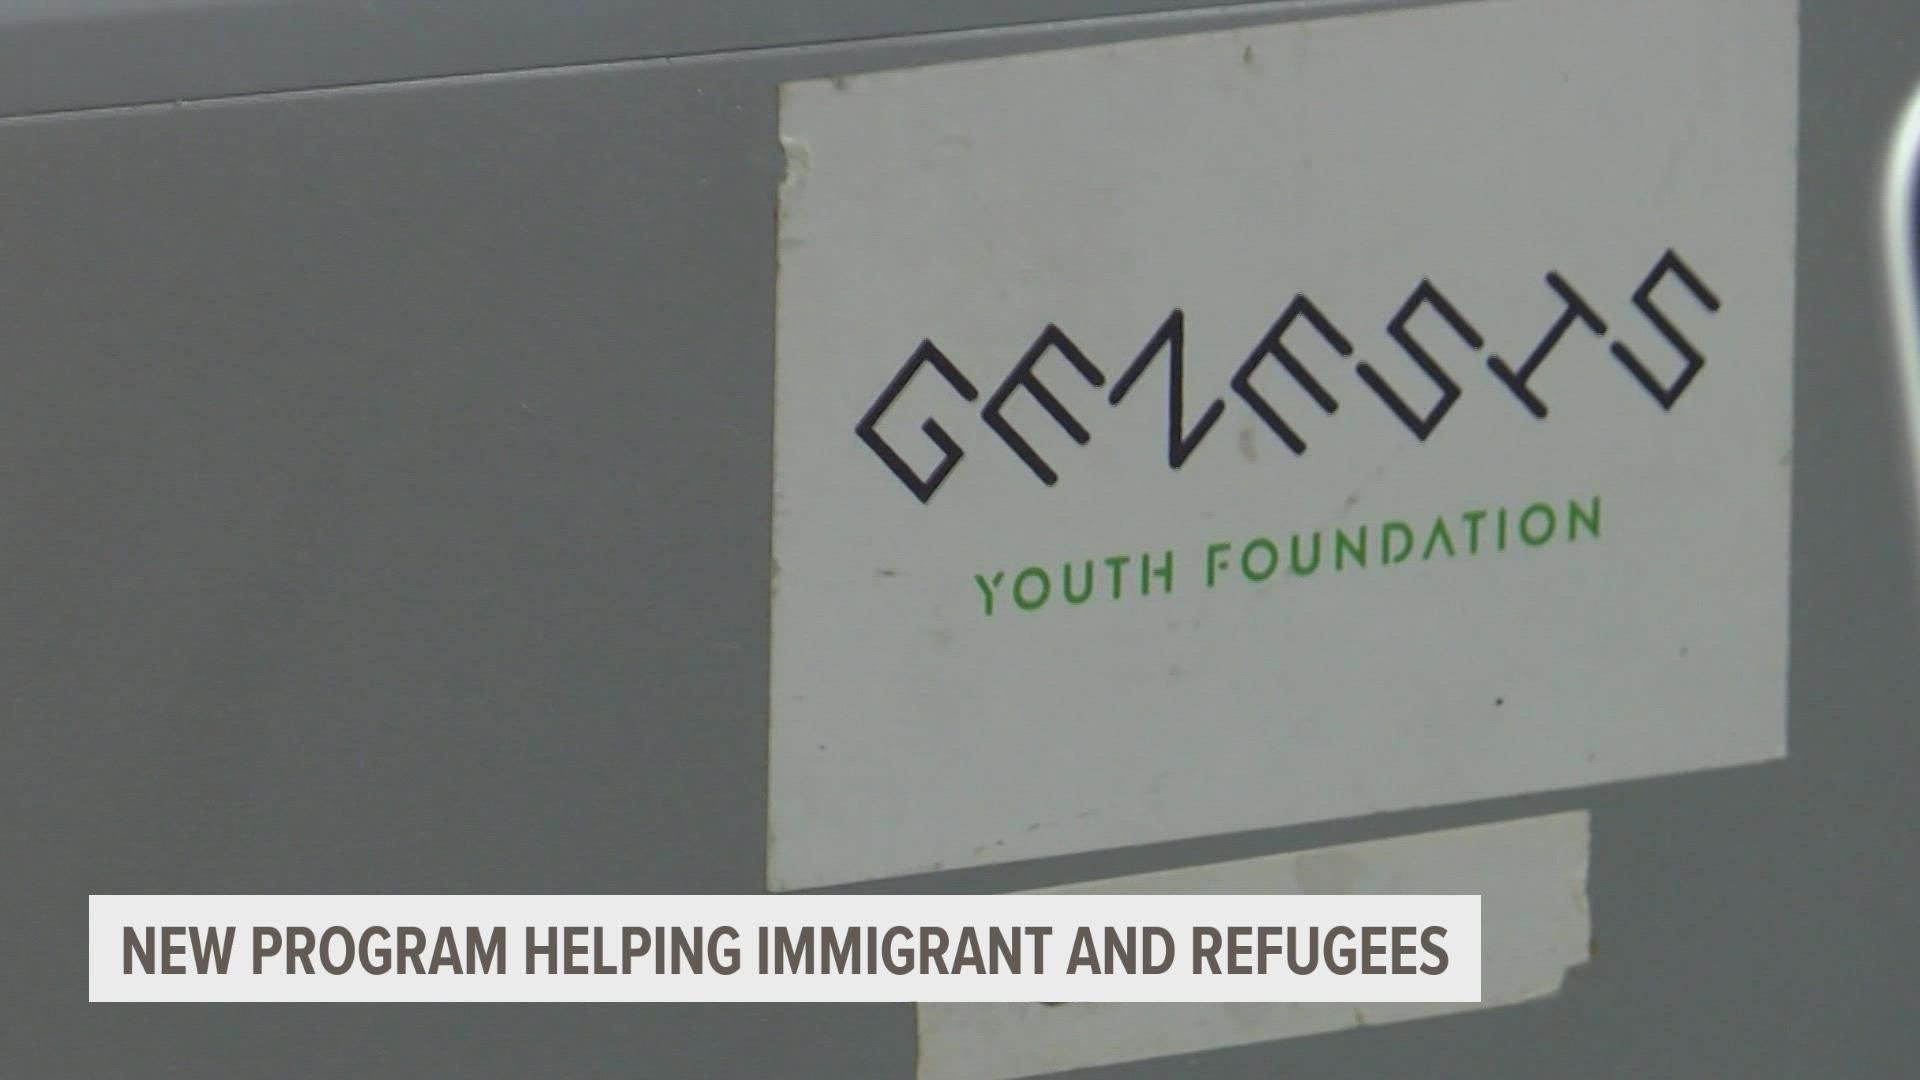 Genesis Youth Foundation is starting a program to help immigrants and refugees gain better work skills.